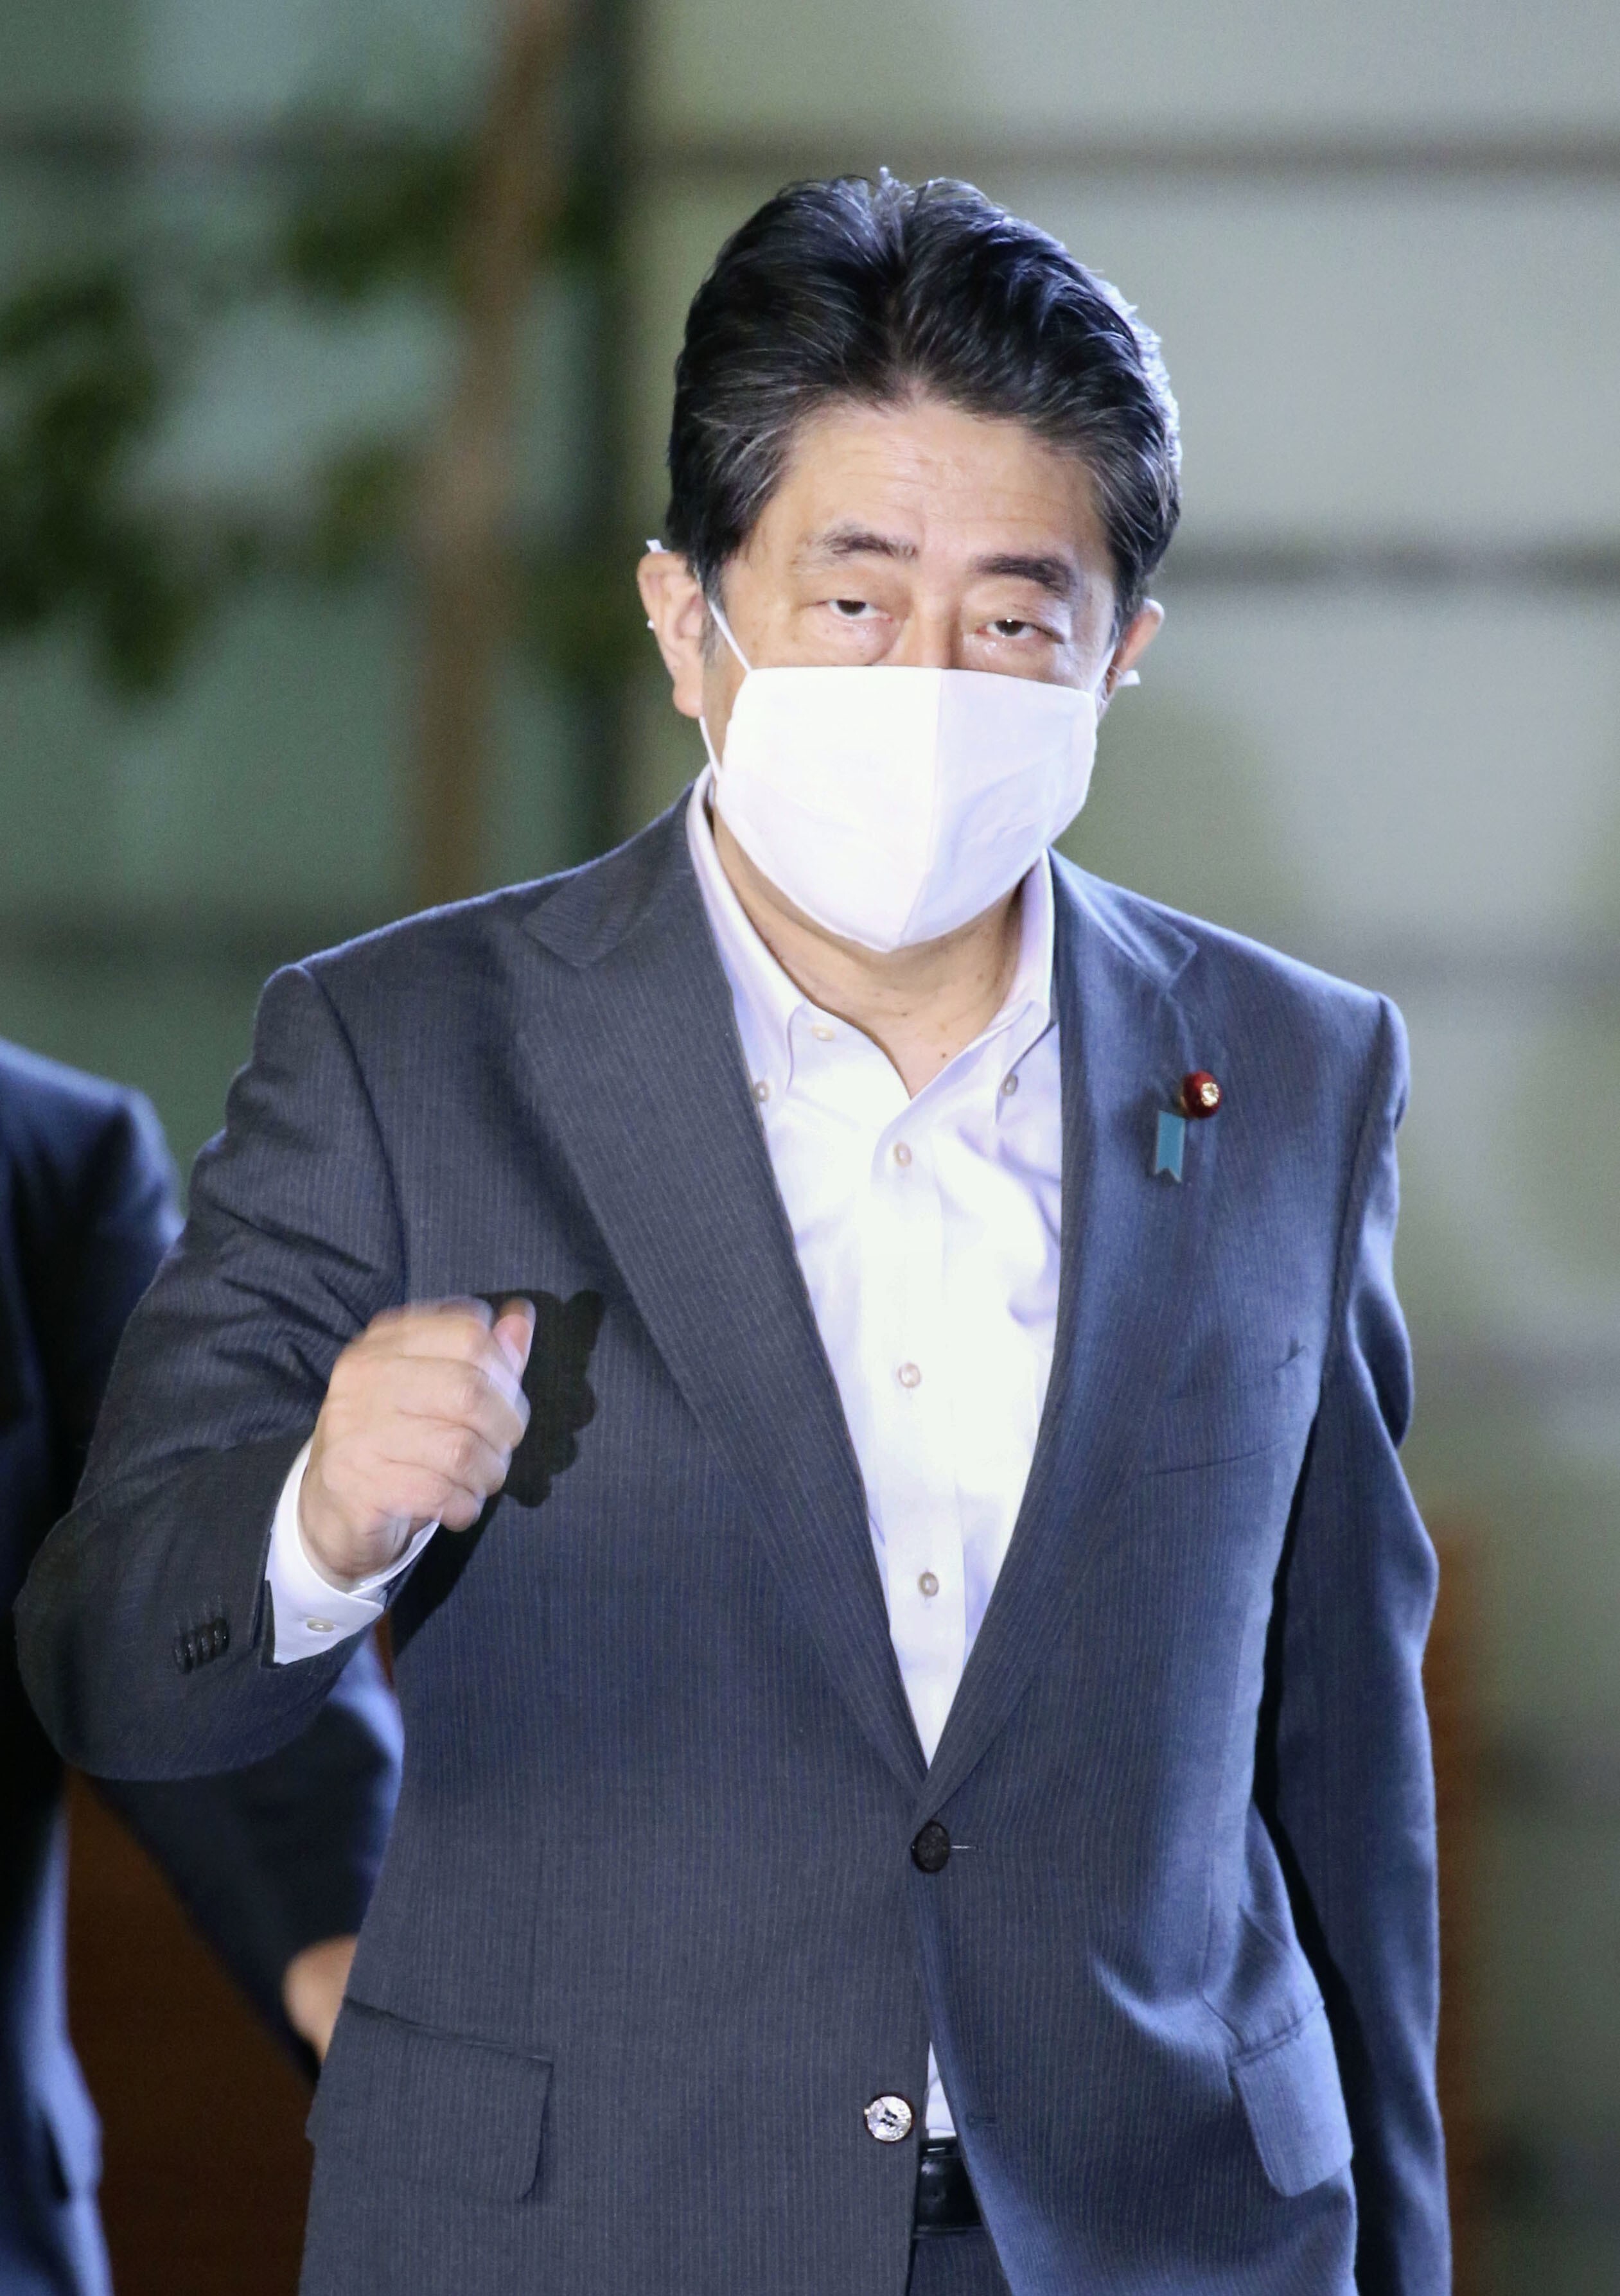 Japanese Prime Minister Shinzo Abe resigned on August 28 after struggling with a relapse of his chronic bowel condition, ulcerative colitis. Photo: Kyodo